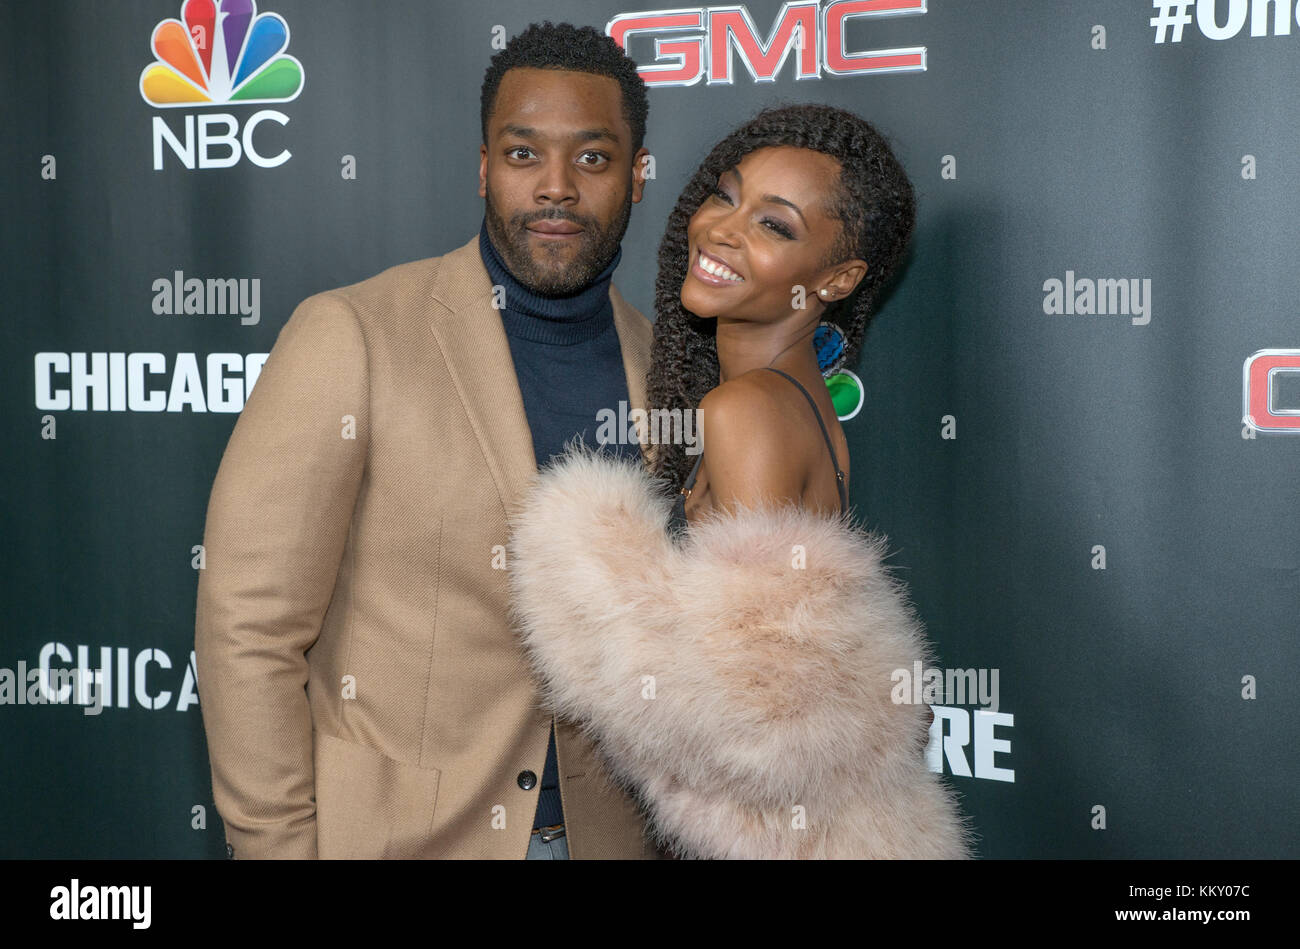 3rd annual NBC One Chicago Party featuring cast members from Chicago Fire, Chicago Med and Chicago P.D - Arrivals  Featuring: LaRoyce Hawkins, Yava DaCosta Where: Chicago, Illinois, United States When: 31 Oct 2017 Credit: WENN Stock Photo